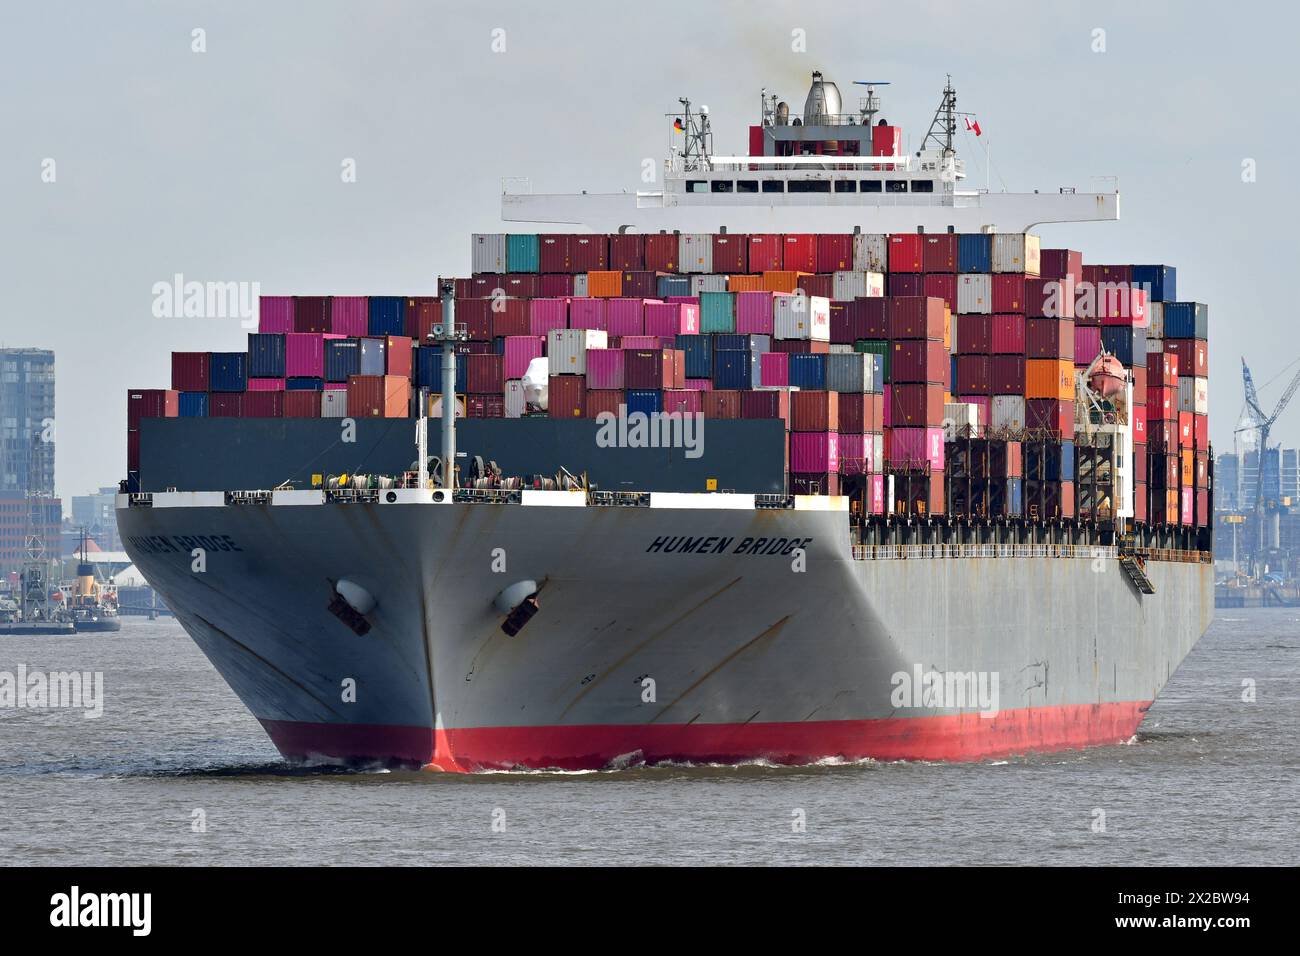 Containership HUMEN BRIDGE outbound from Hamburg Stock Photo